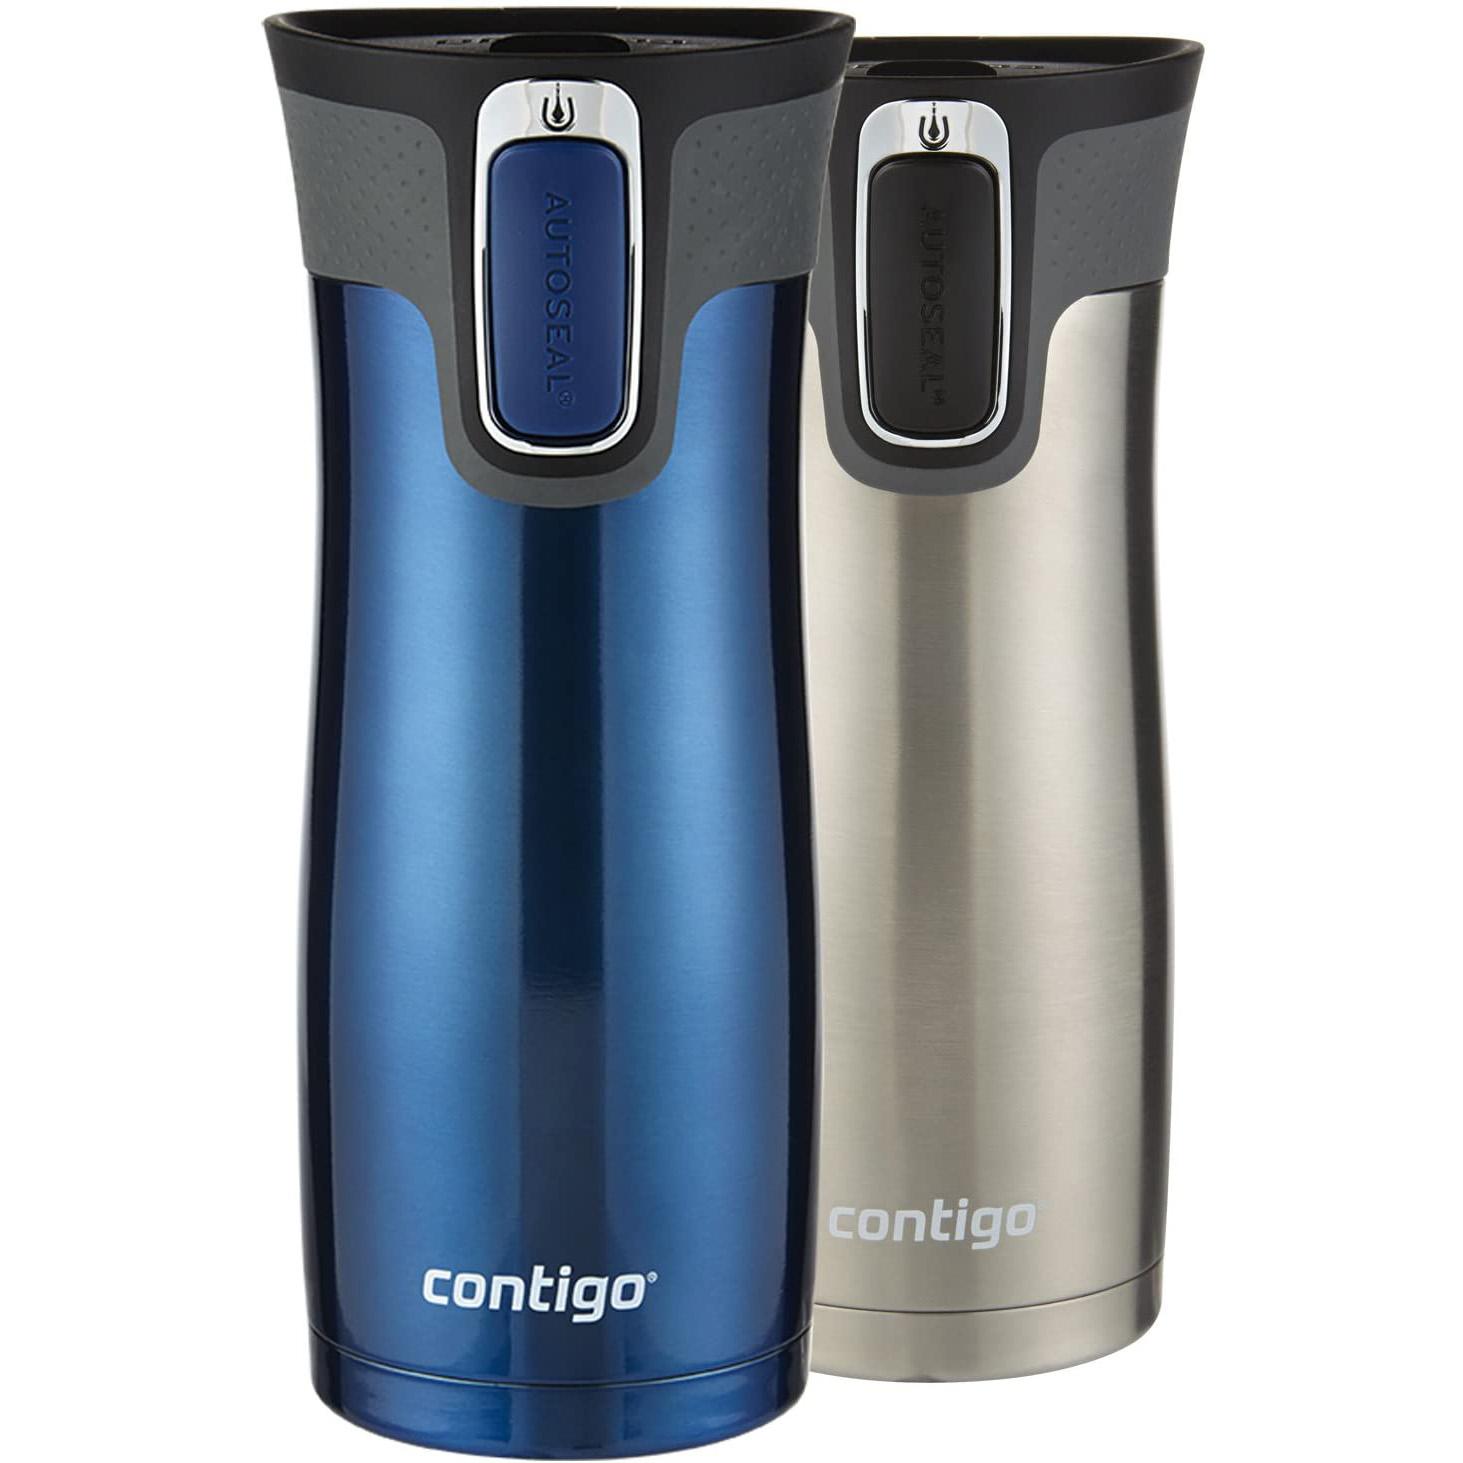 2x Contigo Autoseal West Loop Vaccuum-Insulated Stainless Steel Travel Mug for $19.99